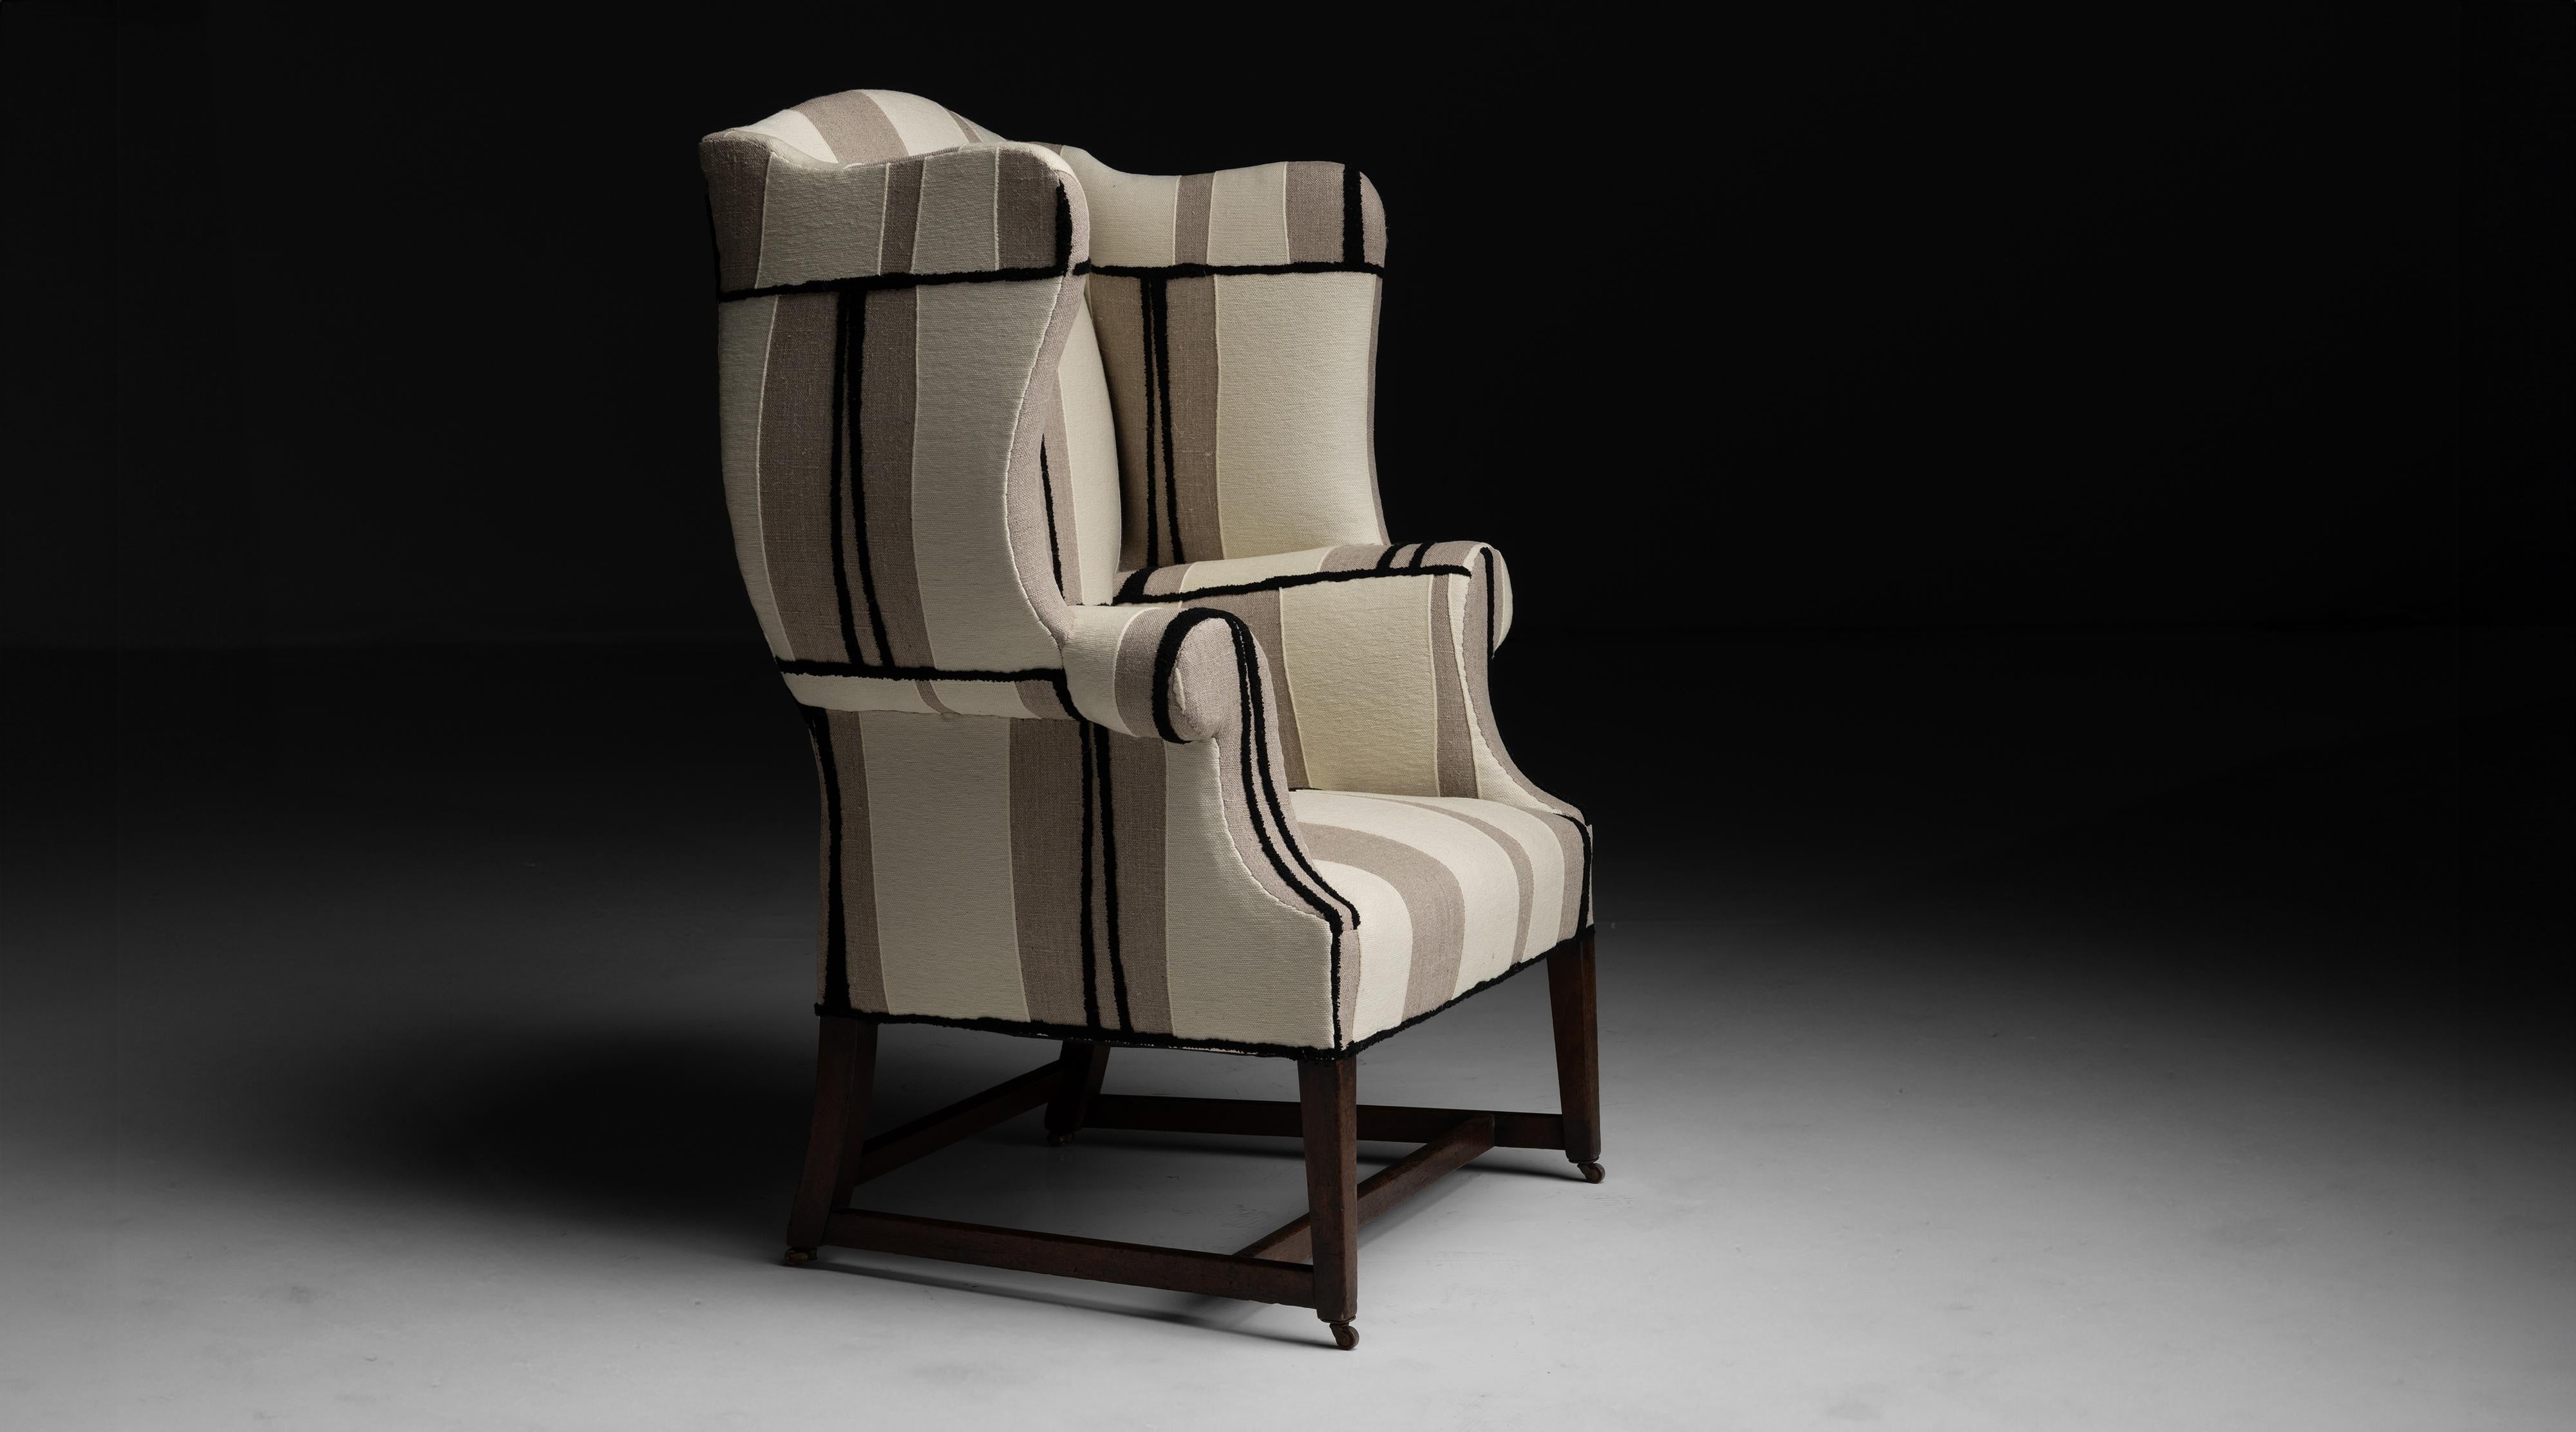 Wingback Armchair in Pierre Frey Fabric
England circa 1890
Antique frame newly upholstered in Pierre Frey linen blend.
34”w x 26.5”d x 48”h x 16”seat